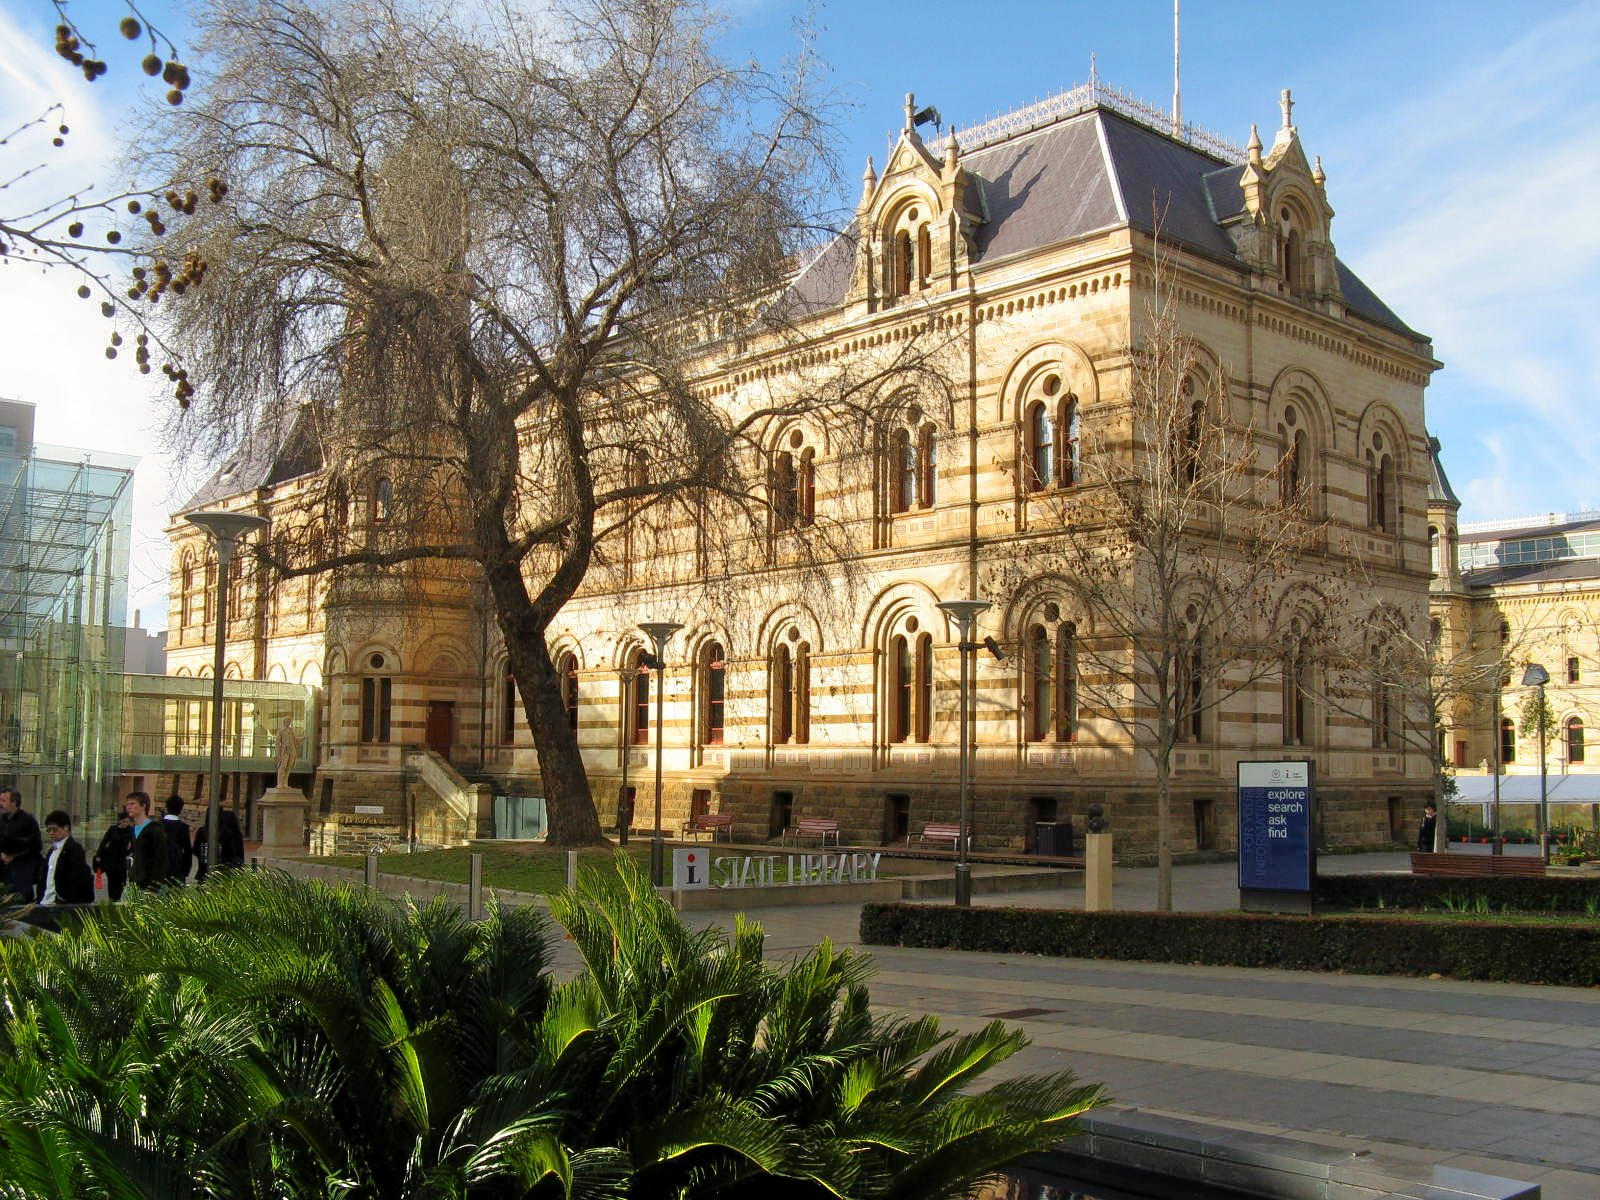 State Library Of South Australia